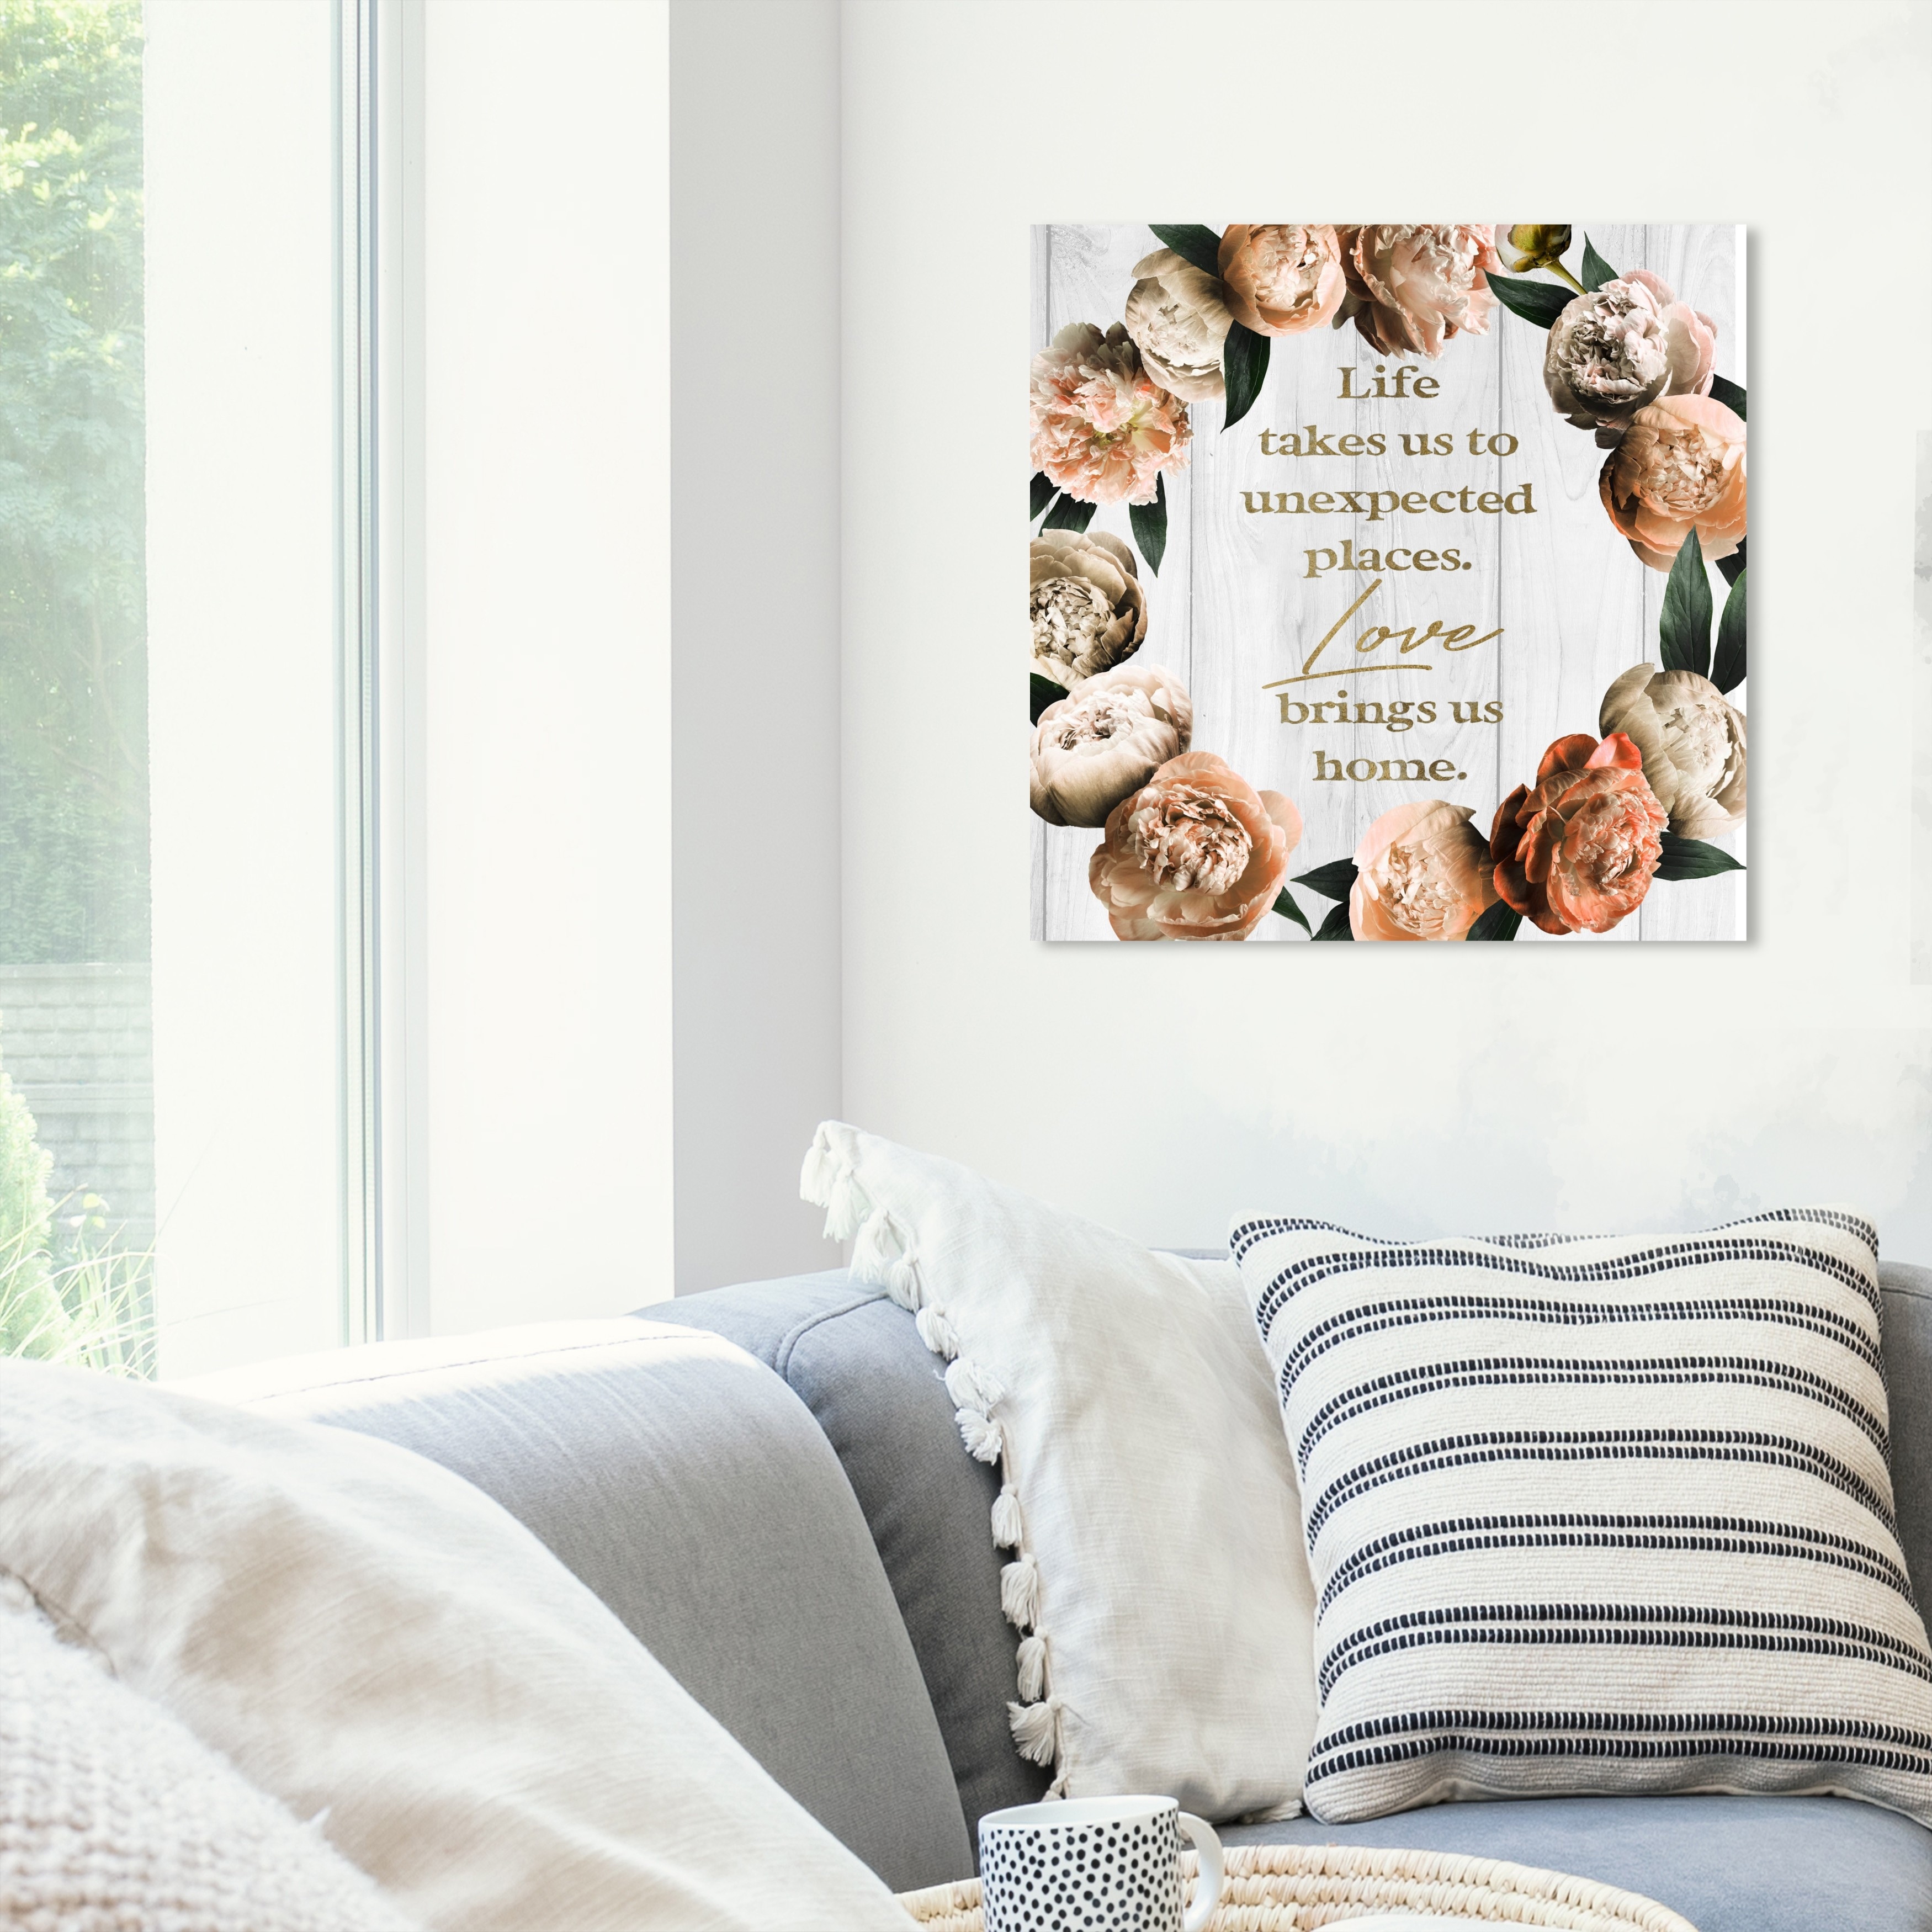 Design District Prints Typography and Quotes Love Brings Us Home Gold and  Metallic Gold Glam Wall Art Canvas Print - Bed Bath & Beyond - 37247277